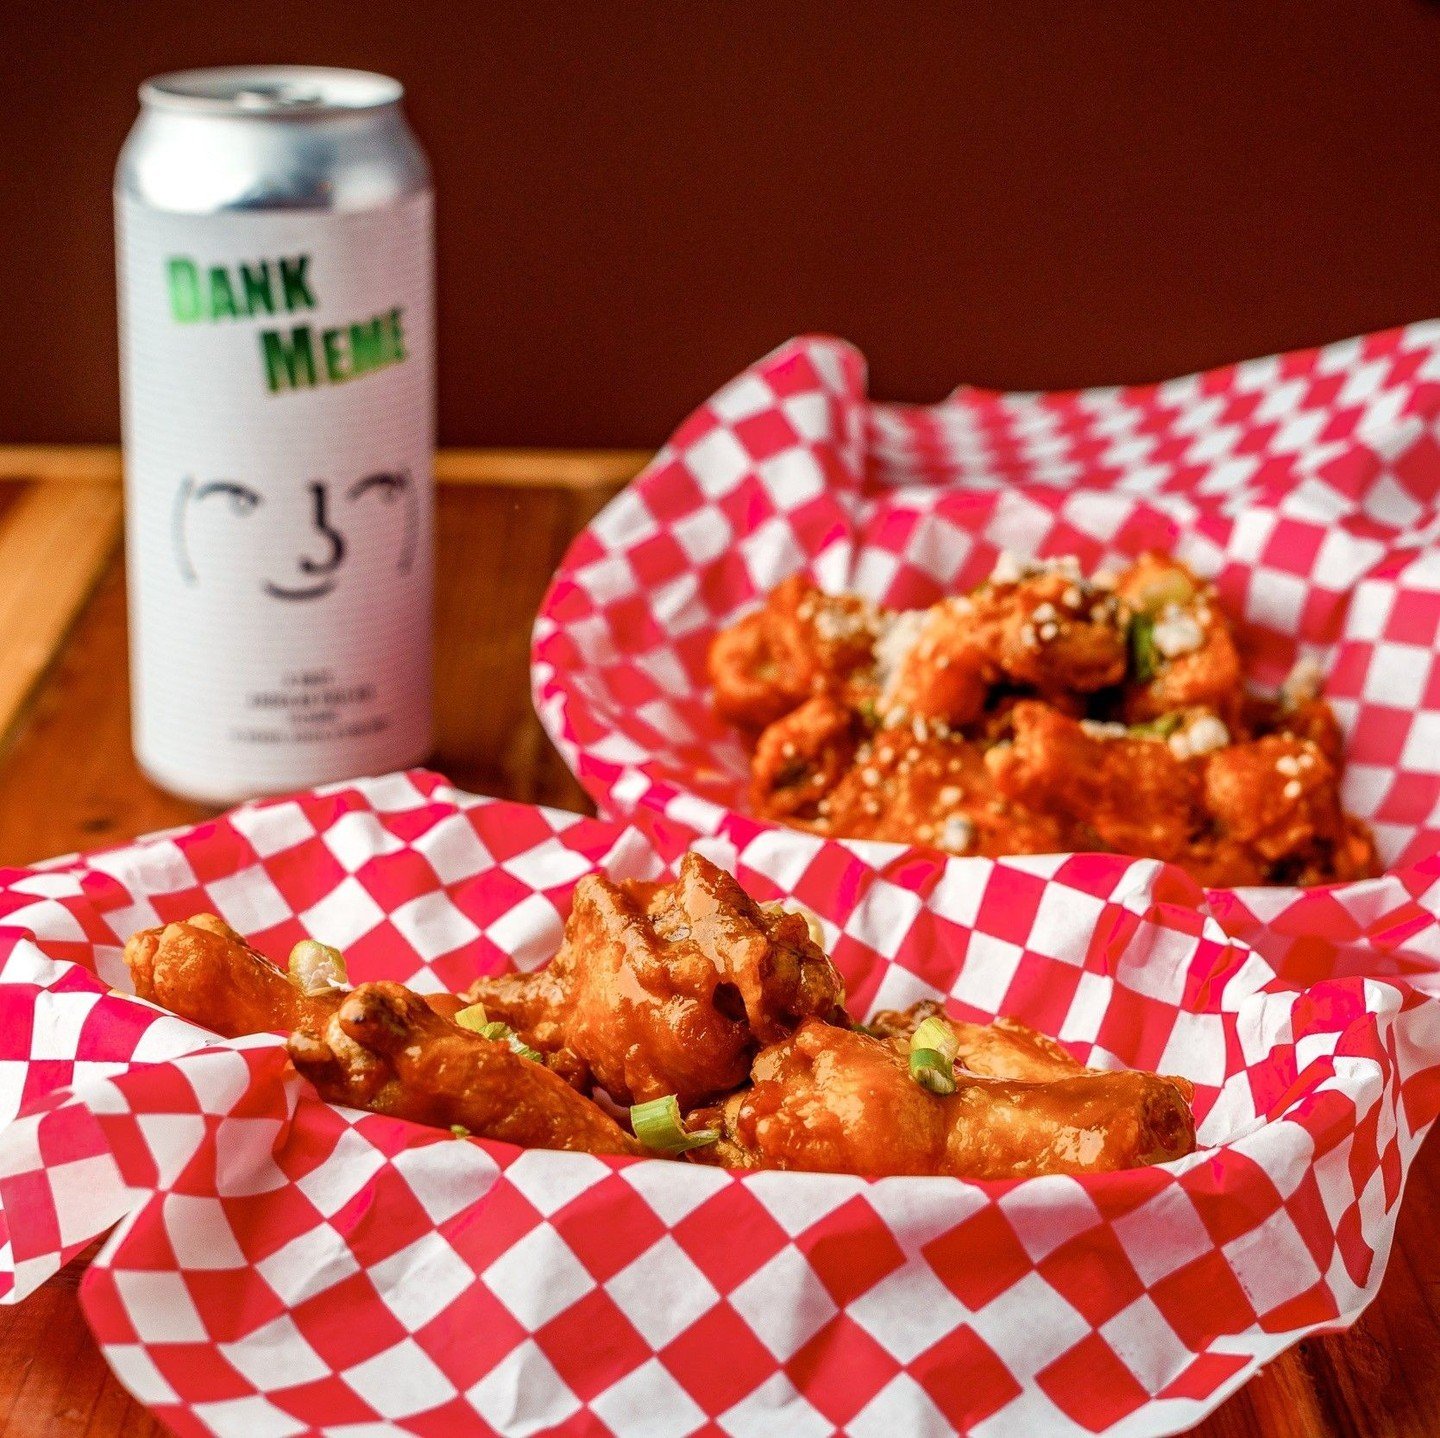 Start thinking about what flavor you want to put on your wings tonight.